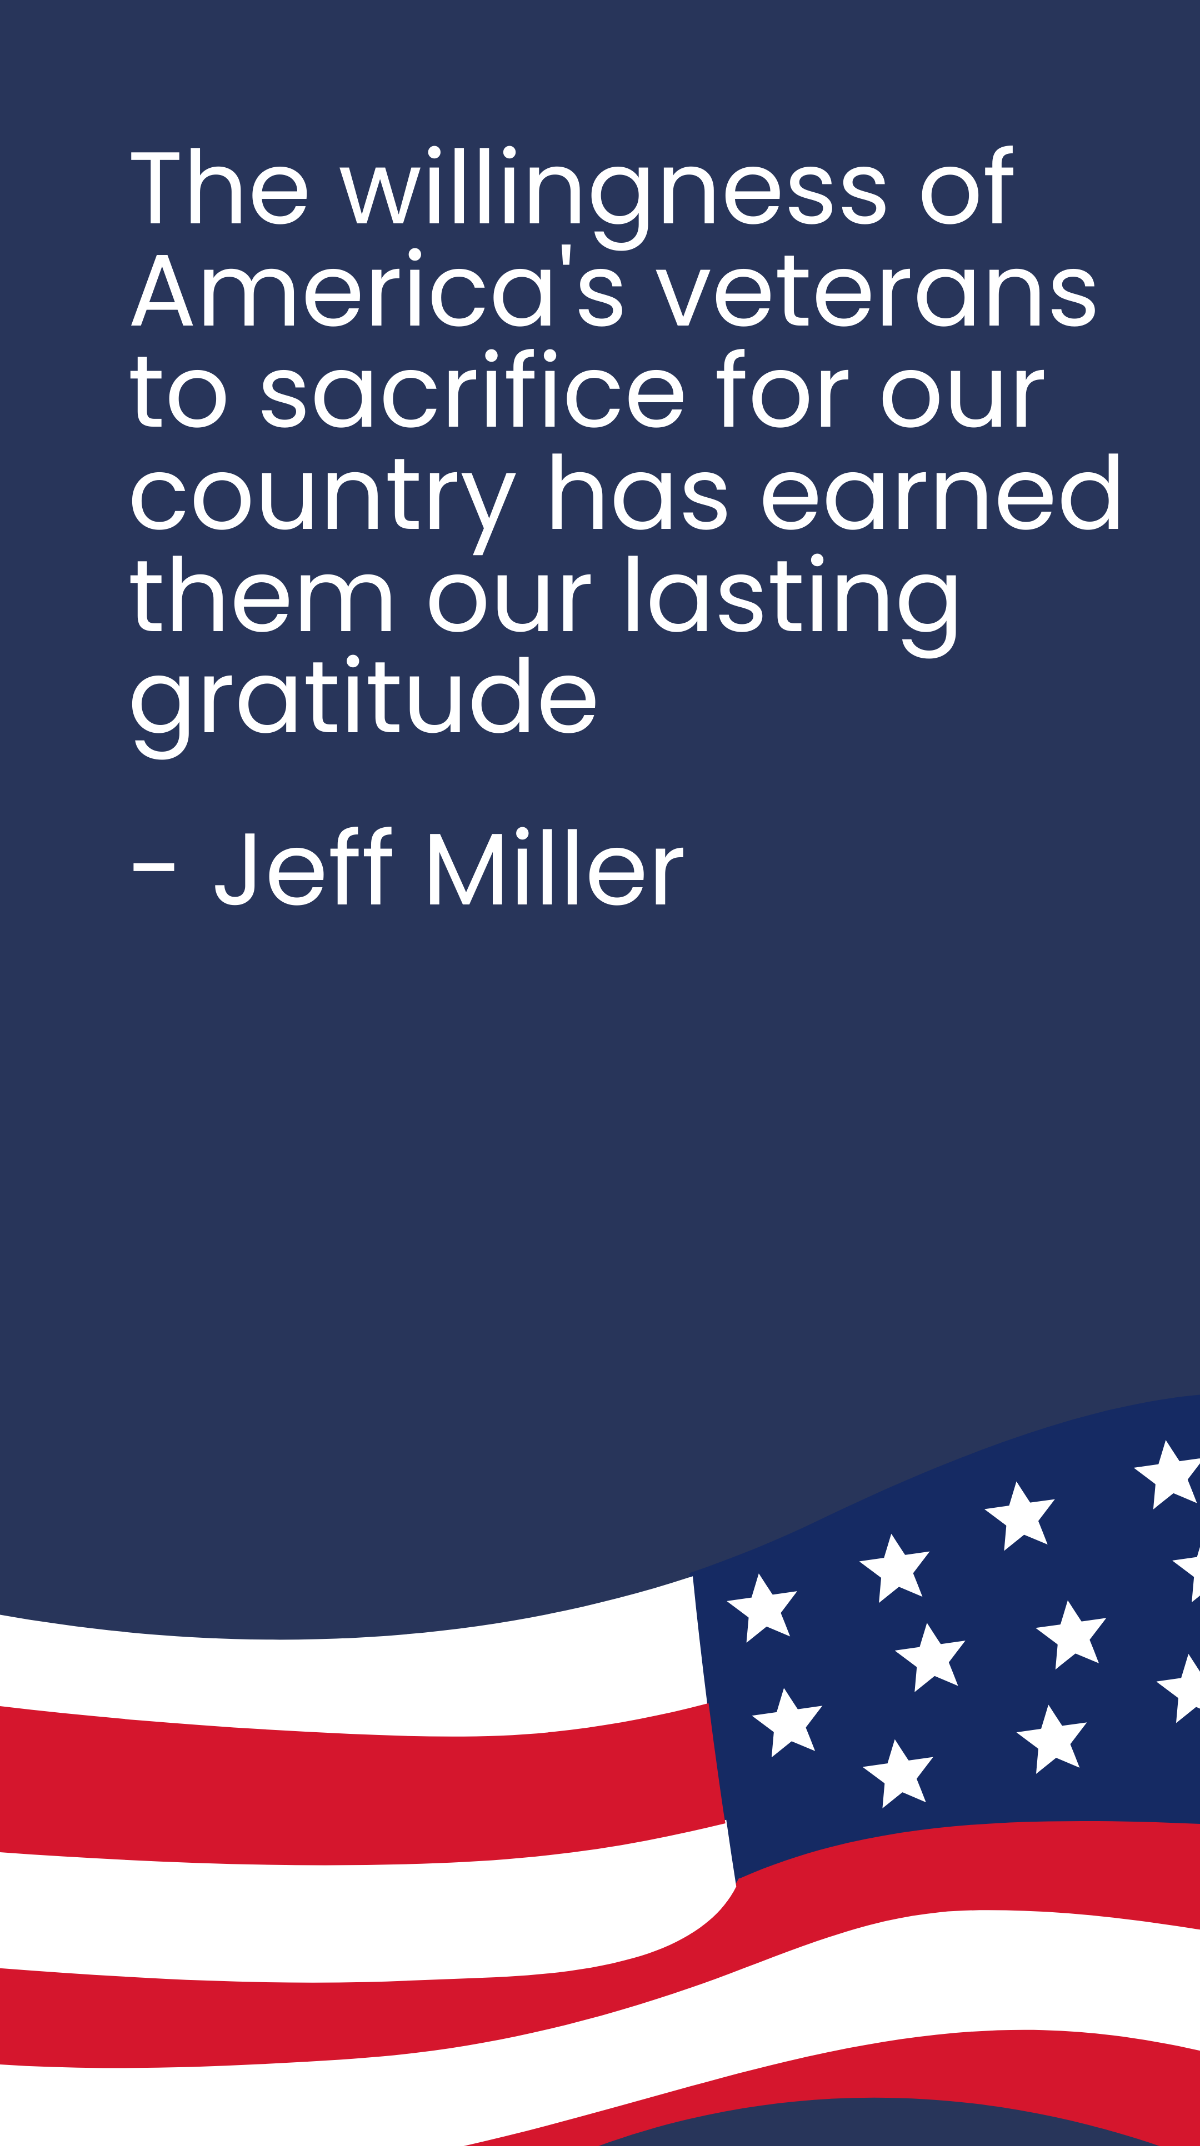 Jeff Miller - The willingness of America's veterans to sacrifice for our country has earned them our lasting gratitude